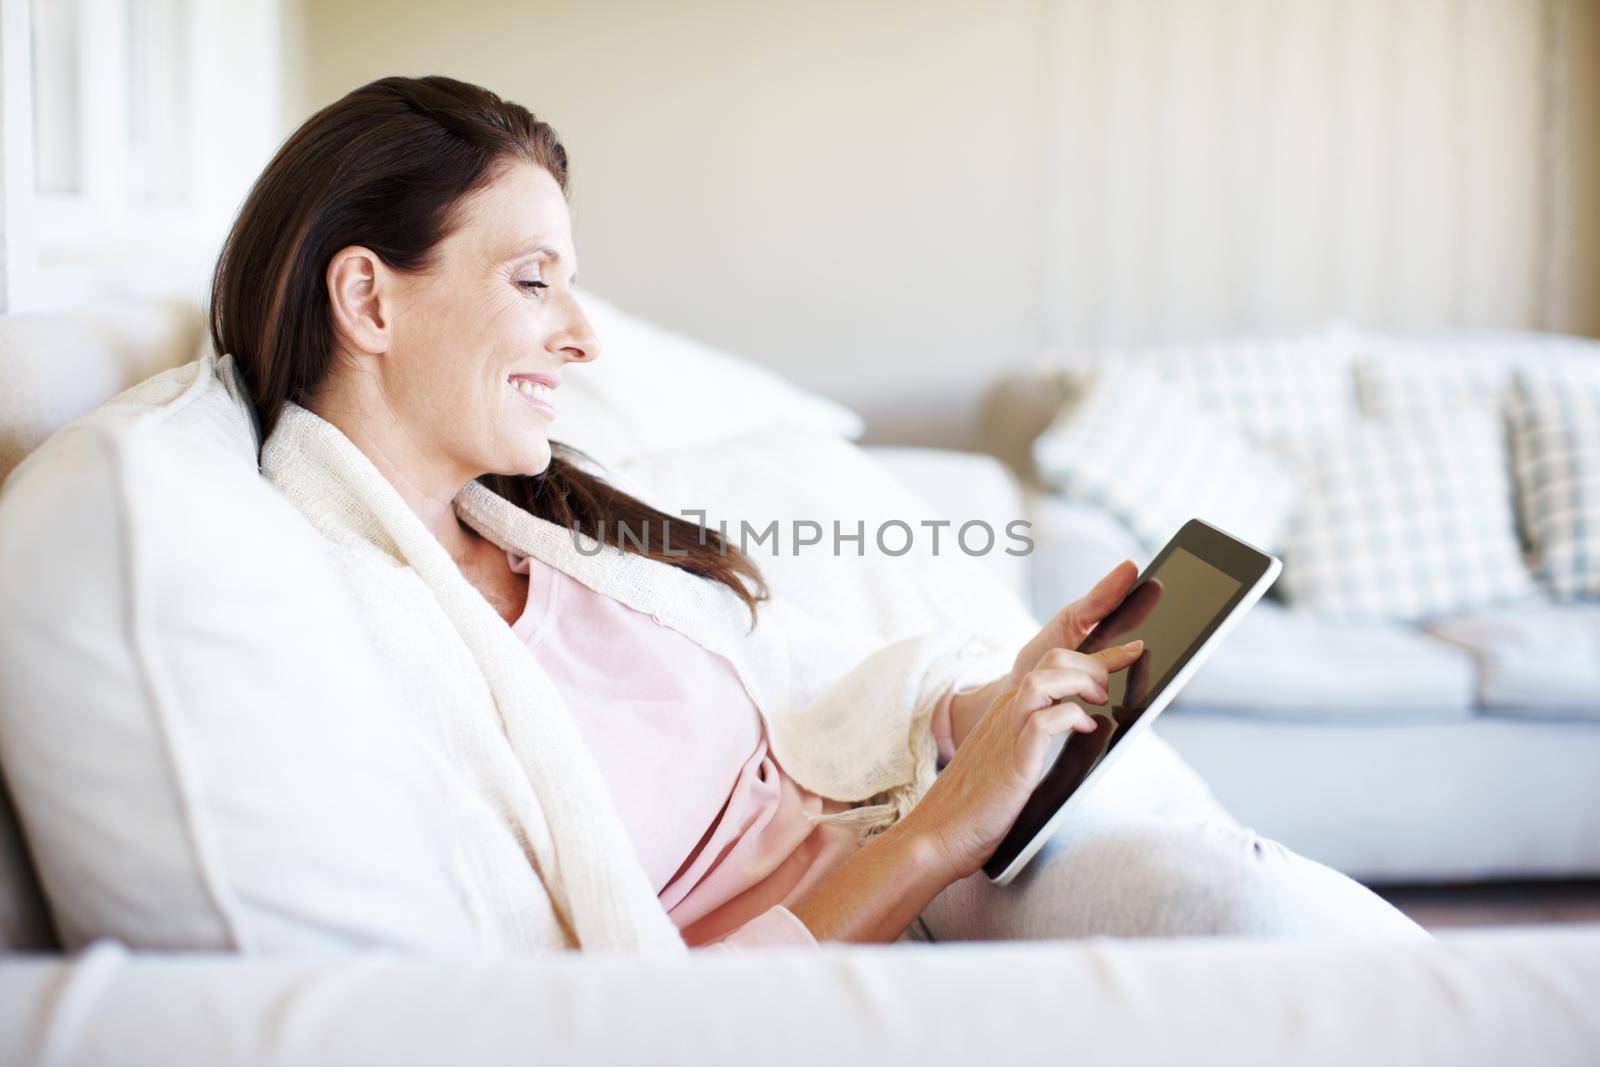 Reading a romance novel on her e-reader. An attractive woman using a digital tablet while sitting on a sofa